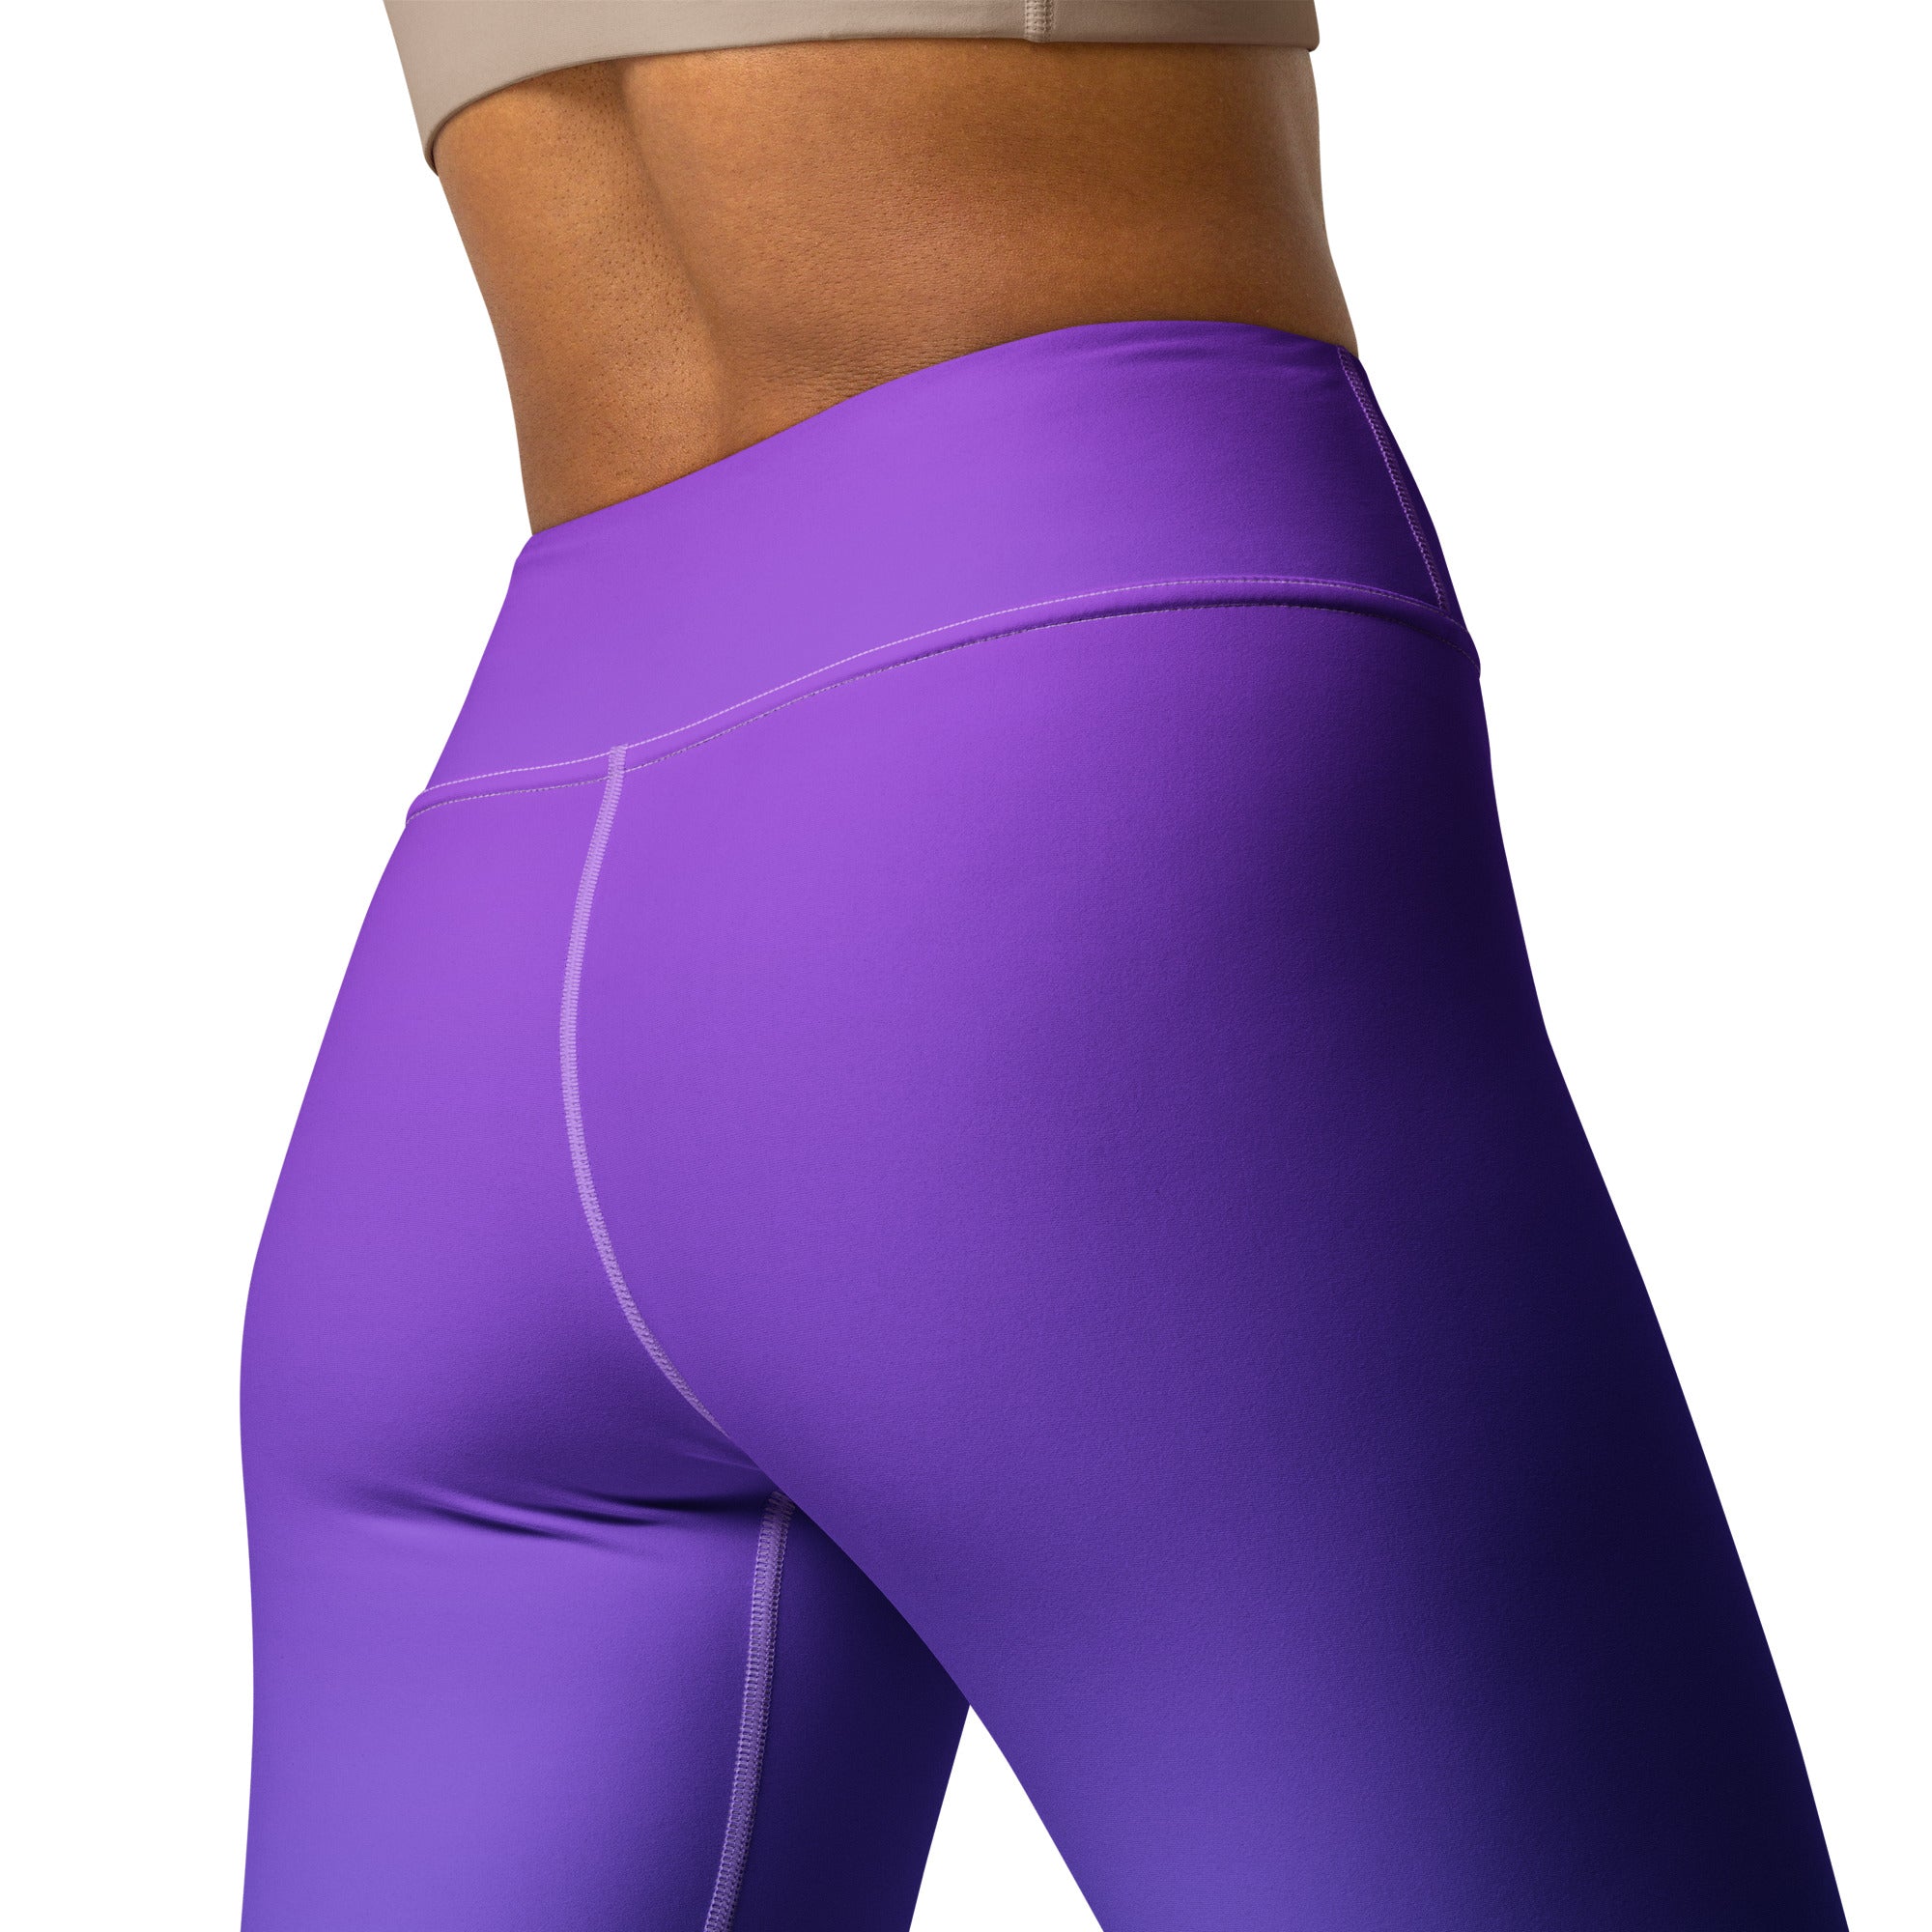 Illuminate your workout wardrobe with the mystical hues of the Aurora Borealis in these unique yoga leggings.